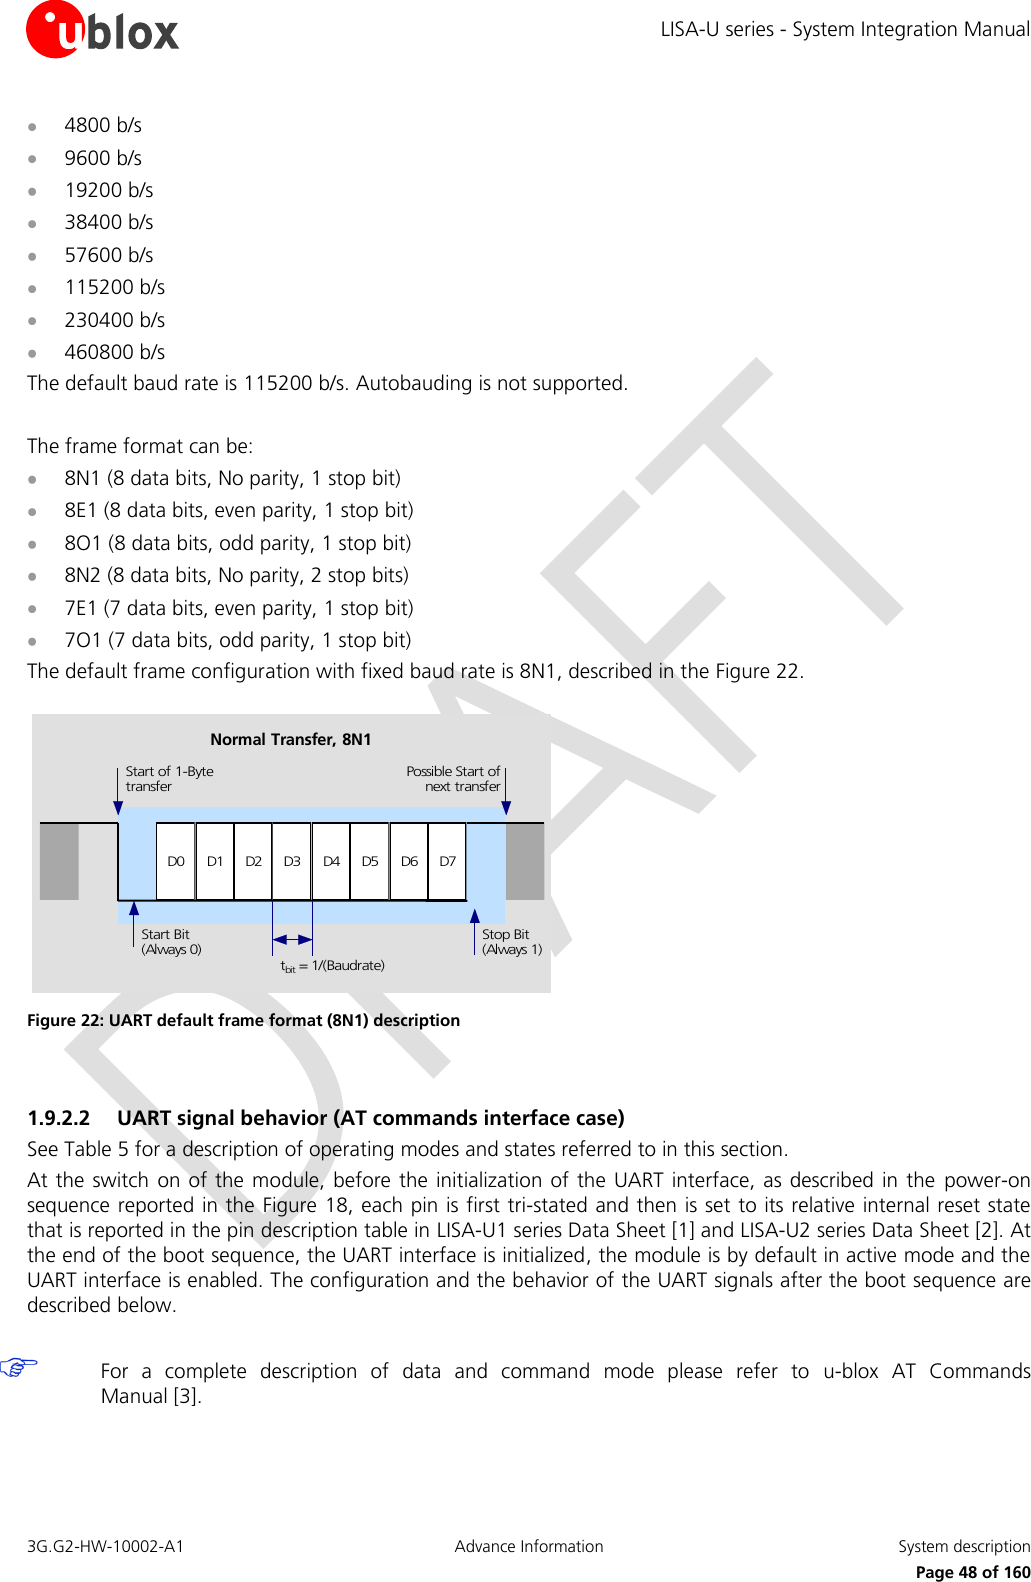 LISA-U series - System Integration Manual 3G.G2-HW-10002-A1  Advance Information  System description      Page 48 of 160  4800 b/s  9600 b/s  19200 b/s  38400 b/s  57600 b/s  115200 b/s  230400 b/s  460800 b/s The default baud rate is 115200 b/s. Autobauding is not supported.  The frame format can be:  8N1 (8 data bits, No parity, 1 stop bit)  8E1 (8 data bits, even parity, 1 stop bit)  8O1 (8 data bits, odd parity, 1 stop bit)  8N2 (8 data bits, No parity, 2 stop bits)  7E1 (7 data bits, even parity, 1 stop bit)  7O1 (7 data bits, odd parity, 1 stop bit) The default frame configuration with fixed baud rate is 8N1, described in the Figure 22. D0 D1 D2 D3 D4 D5 D6 D7Start of 1-BytetransferStart Bit(Always 0)Possible Start ofnext transferStop Bit(Always 1)tbit = 1/(Baudrate)Normal Transfer, 8N1 Figure 22: UART default frame format (8N1) description  1.9.2.2 UART signal behavior (AT commands interface case) See Table 5 for a description of operating modes and states referred to in this section. At the switch on of the  module, before the initialization of the  UART interface, as described in the  power-on sequence reported in the Figure 18, each pin is first tri-stated and then is set to its relative internal reset state that is reported in the pin description table in LISA-U1 series Data Sheet [1] and LISA-U2 series Data Sheet [2]. At the end of the boot sequence, the UART interface is initialized, the module is by default in active mode and the UART interface is enabled. The configuration and the behavior of the UART signals after the boot sequence are described below.   For  a  complete  description  of  data  and  command  mode  please  refer  to  u-blox  AT  Commands Manual [3].  